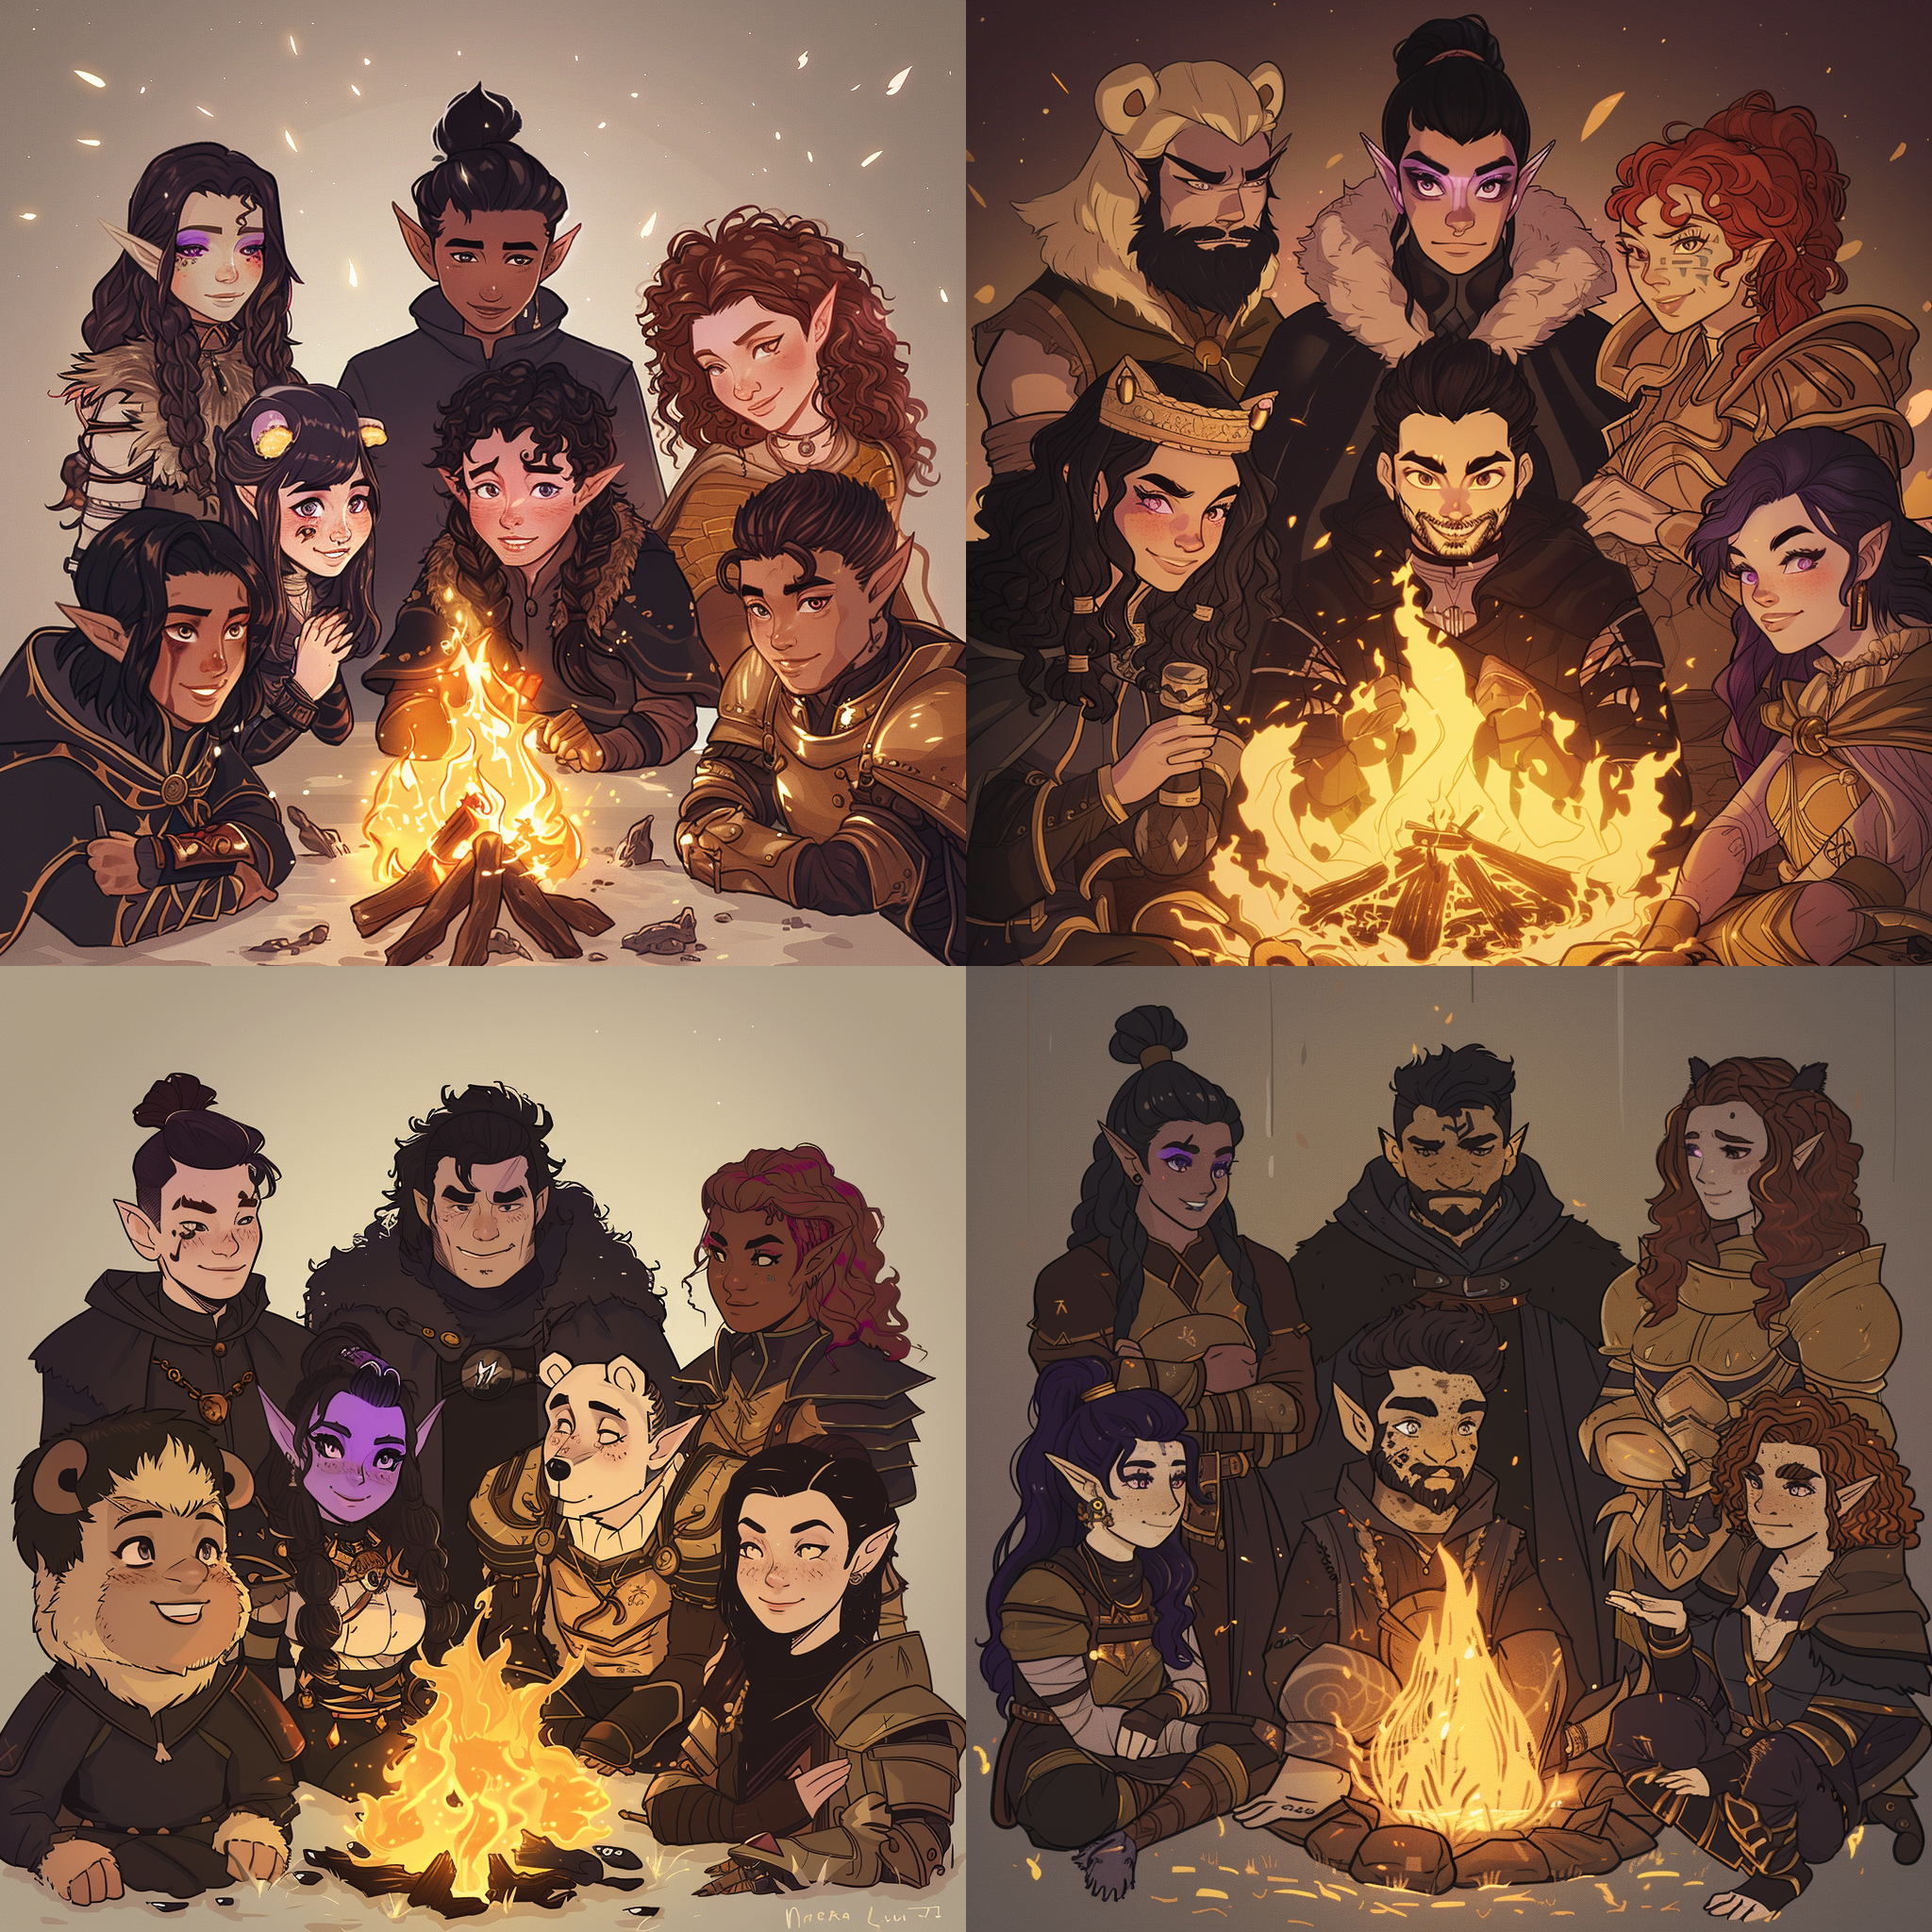 an anime style drawing of the following six characters around a fire: - Zook! A gnome mushroom druid boy with a deep connection to nature. - Simon! A young, studious wizard man with long black hair in a messy bun and clean-shaven face, wearing black robes. - Adam! A goliath male warrior adorned in a shamanistic polar bear outfit, signifying a high tribal status. - Serra! A young woman with impeccable taste and make-up, purple eyes, black hair, and a confident smirk, showcasing an enigmatic allure. - Mera! A vibrant young Irish woman with curly red hair, dressed as a swashbuckler, full of adventurous spirit. - Aurora! A strong, mid-30s female warrior with warm brown hair and eyes, wearing gold armor, with a severe expression.